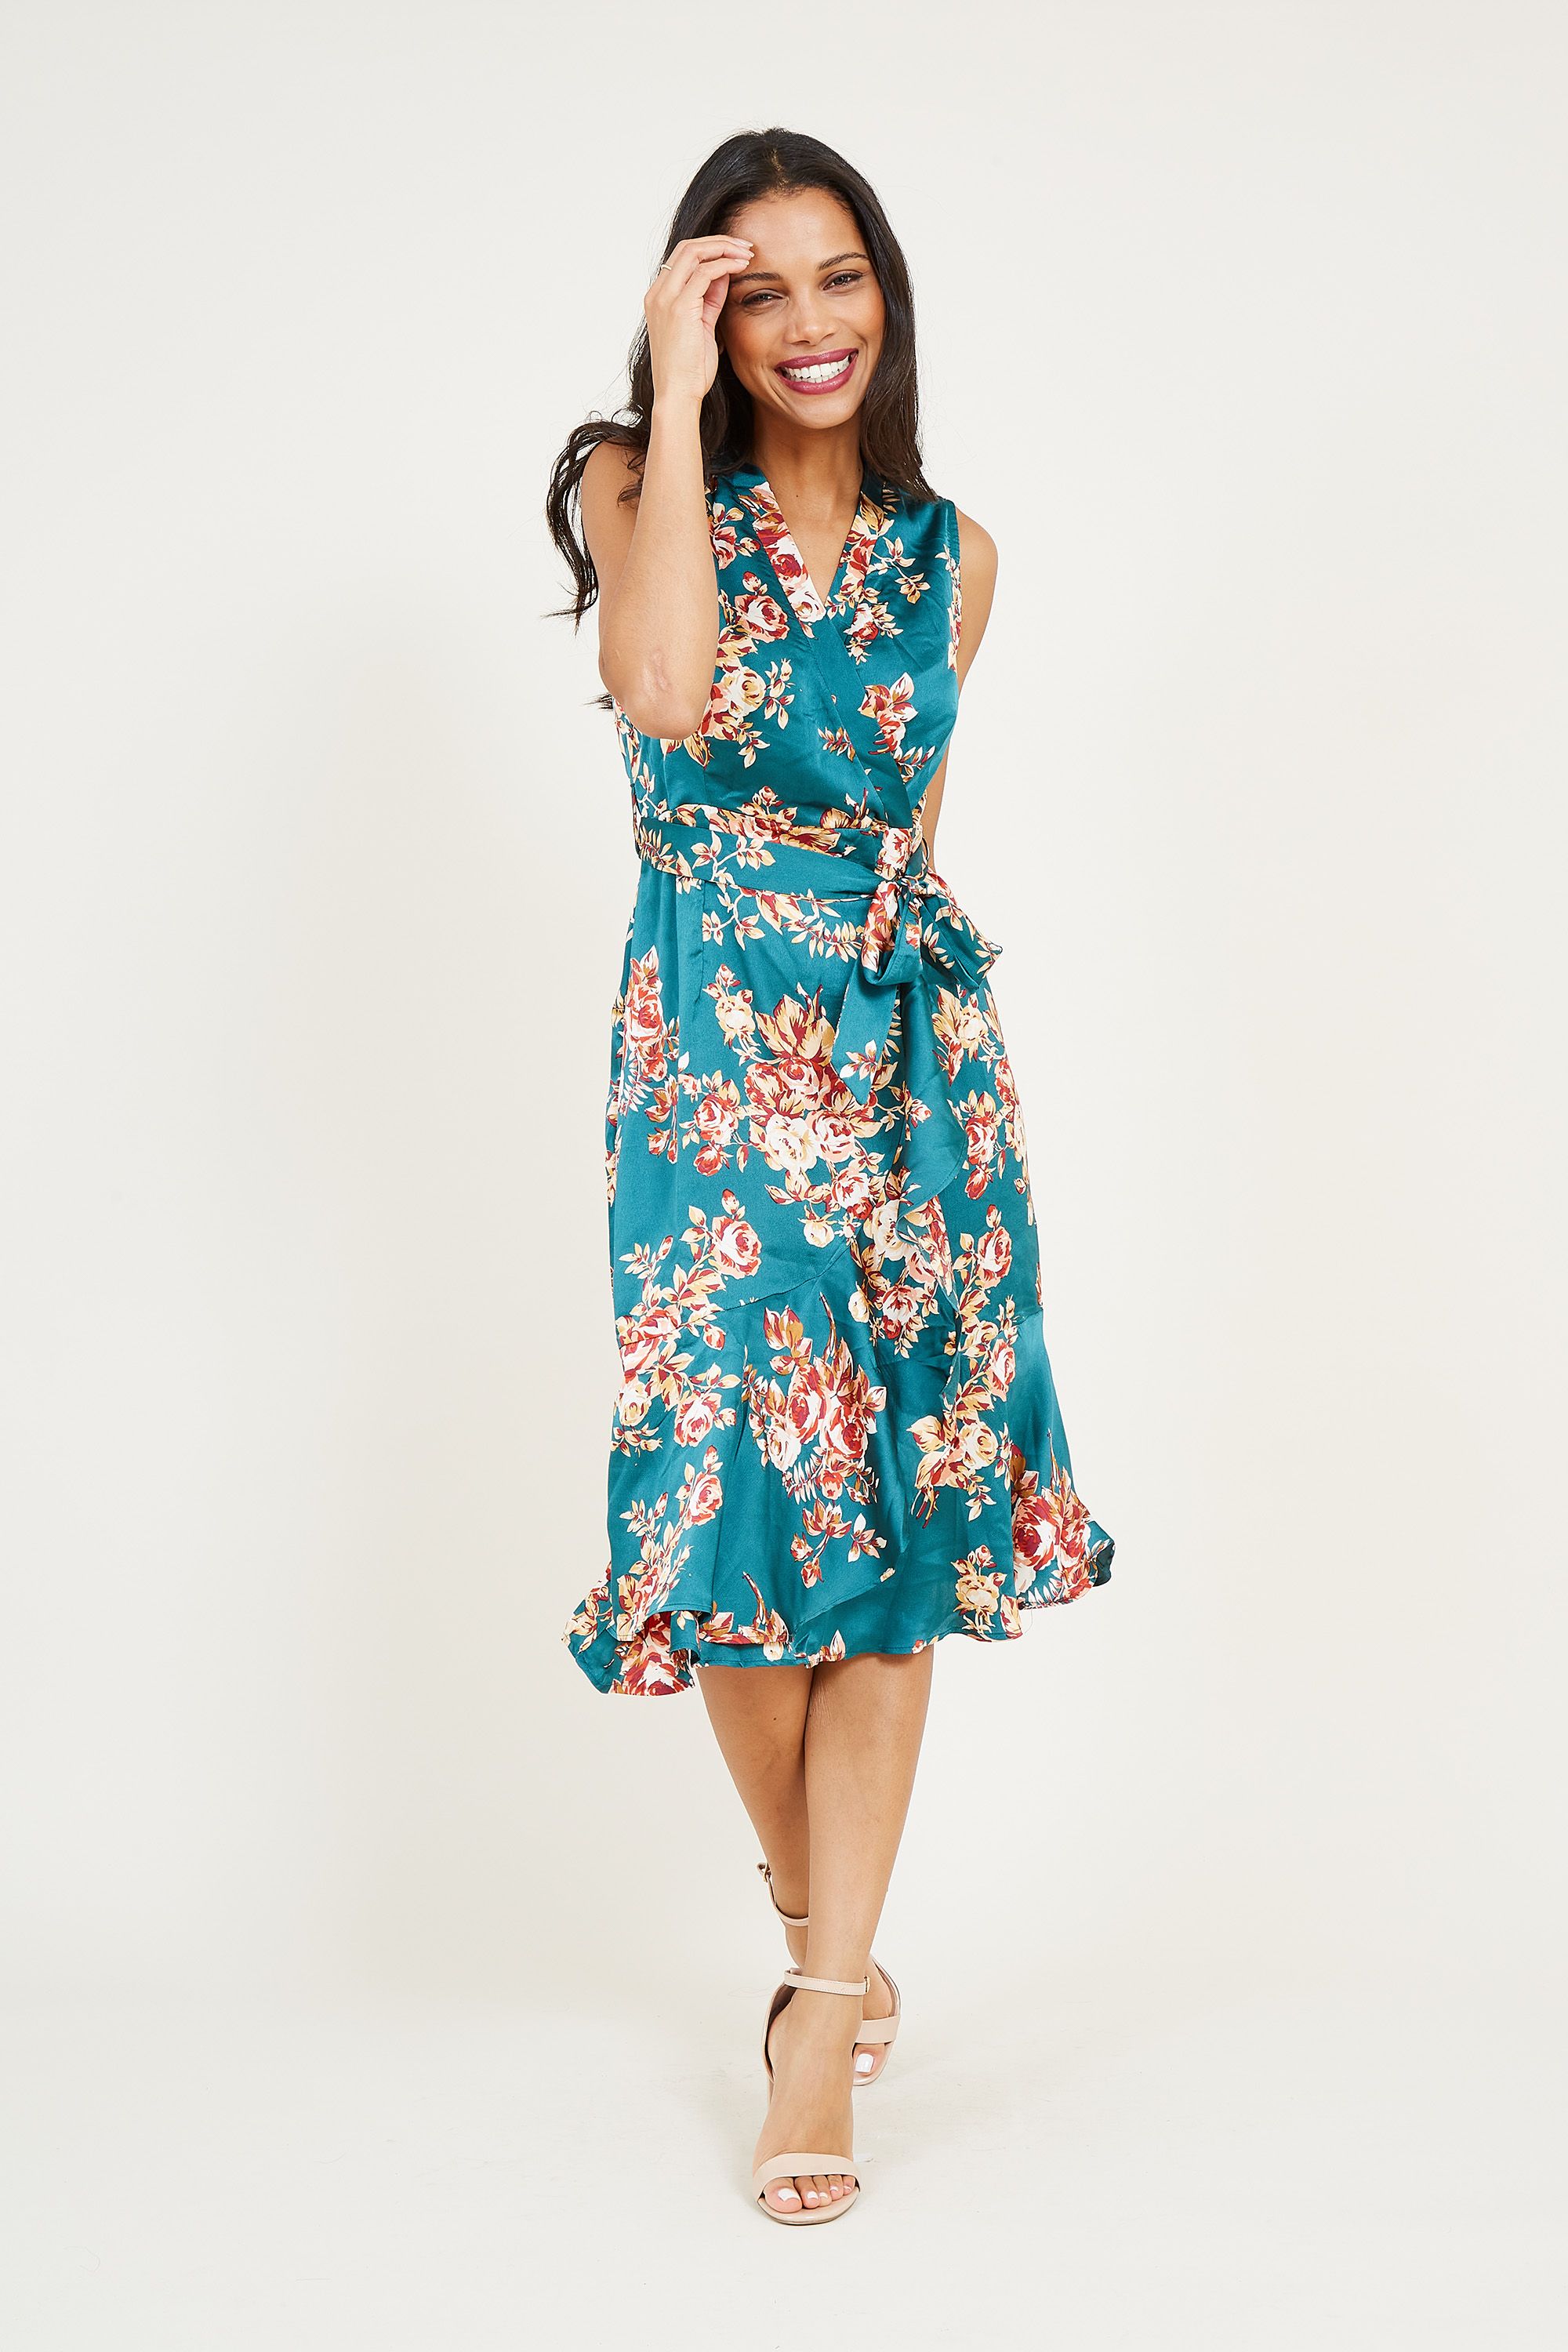 In a vivid shade of green, this Mela Floral Satin Midi Dress offers a timeless touch to your wardrobe. Floating below the knee, this versatile dress is designed with a relaxed shape that cinches at the waist. The slinky fabric offers a luxurious feel, printed with colourful florals for the perfect finish. Accessorize with metallic heels for parties and off-duty evenings.